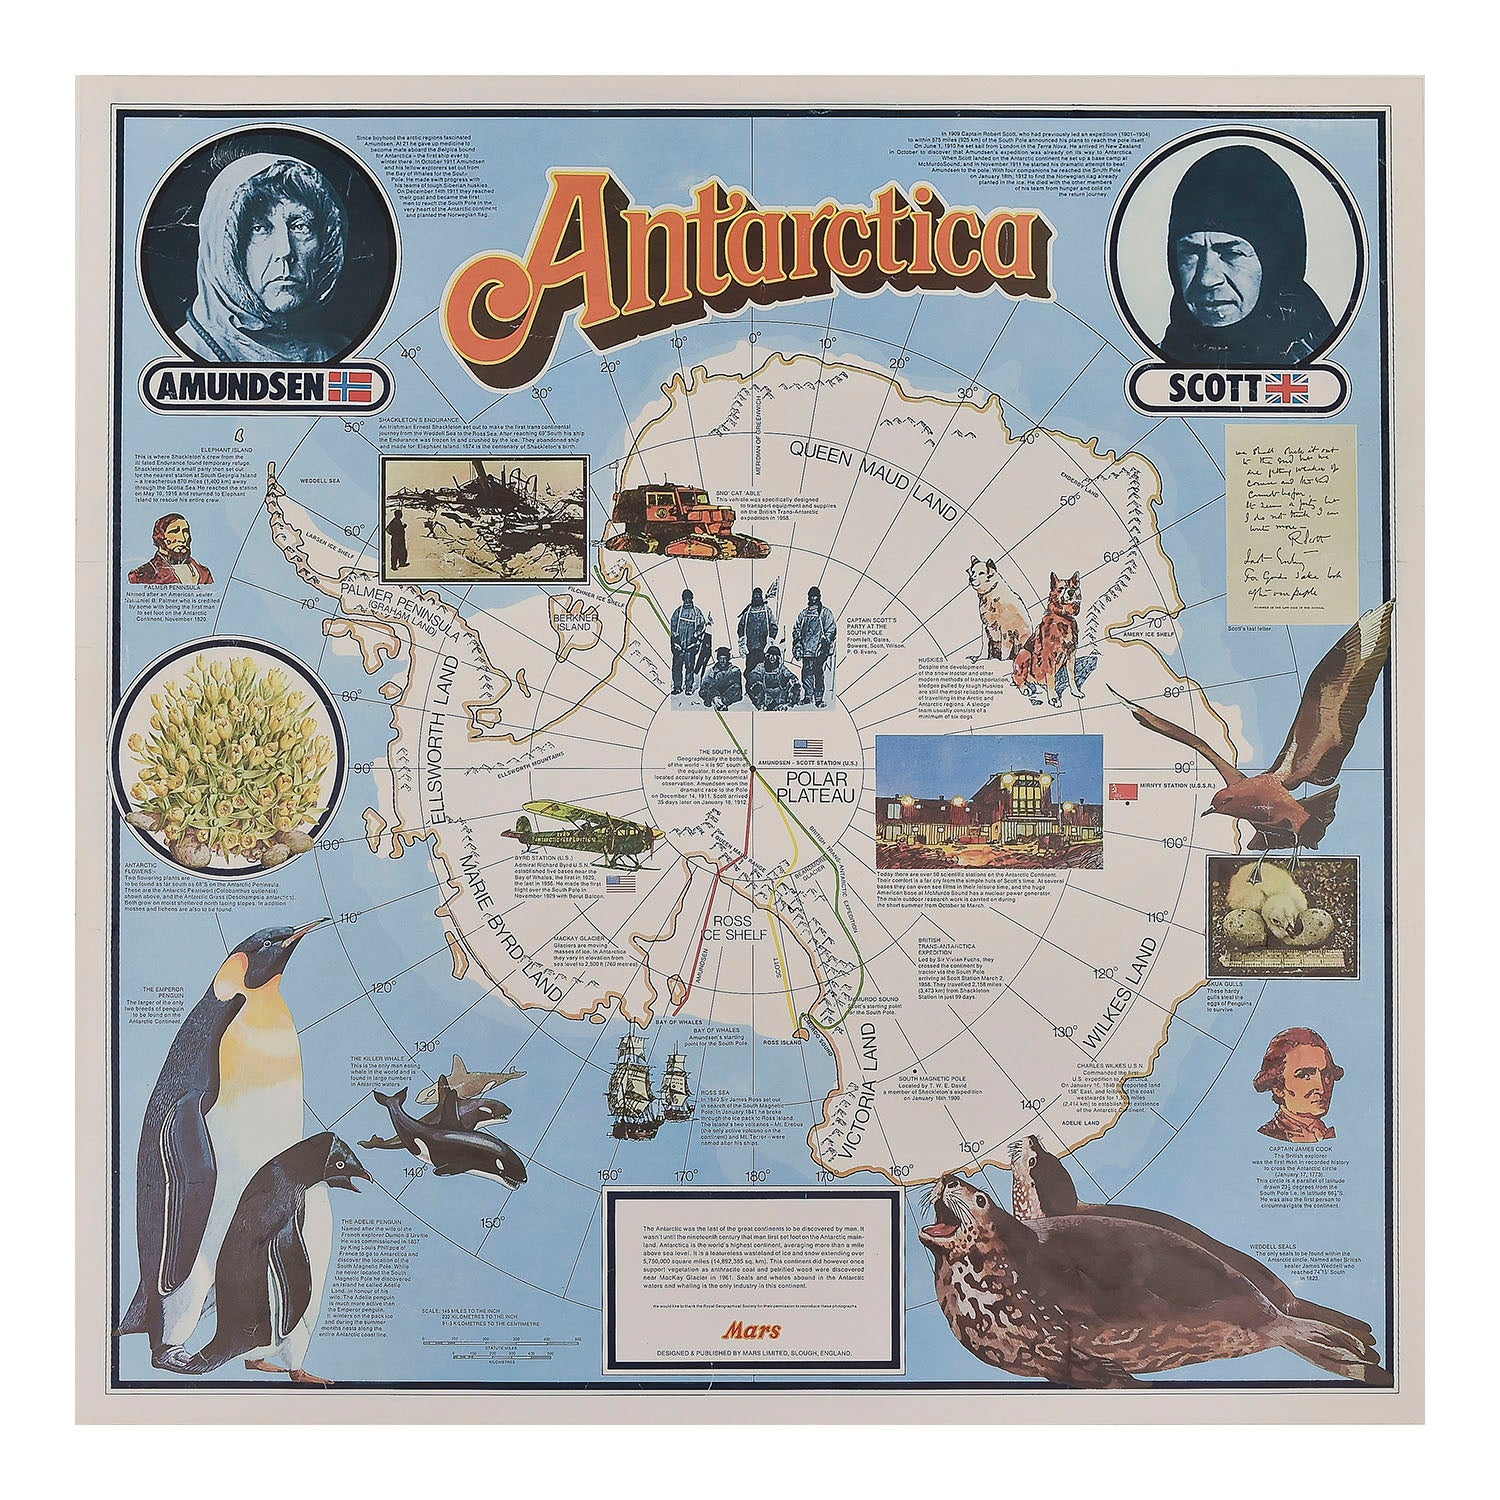 original promotional map of Antarctica published by the confectioner Mars c.1981. The design features an accurate map of the region (scale 145 miles to the inch), with images supplied by the Royal Geographic Society of famous polar explorers, research centres and wildlife. 